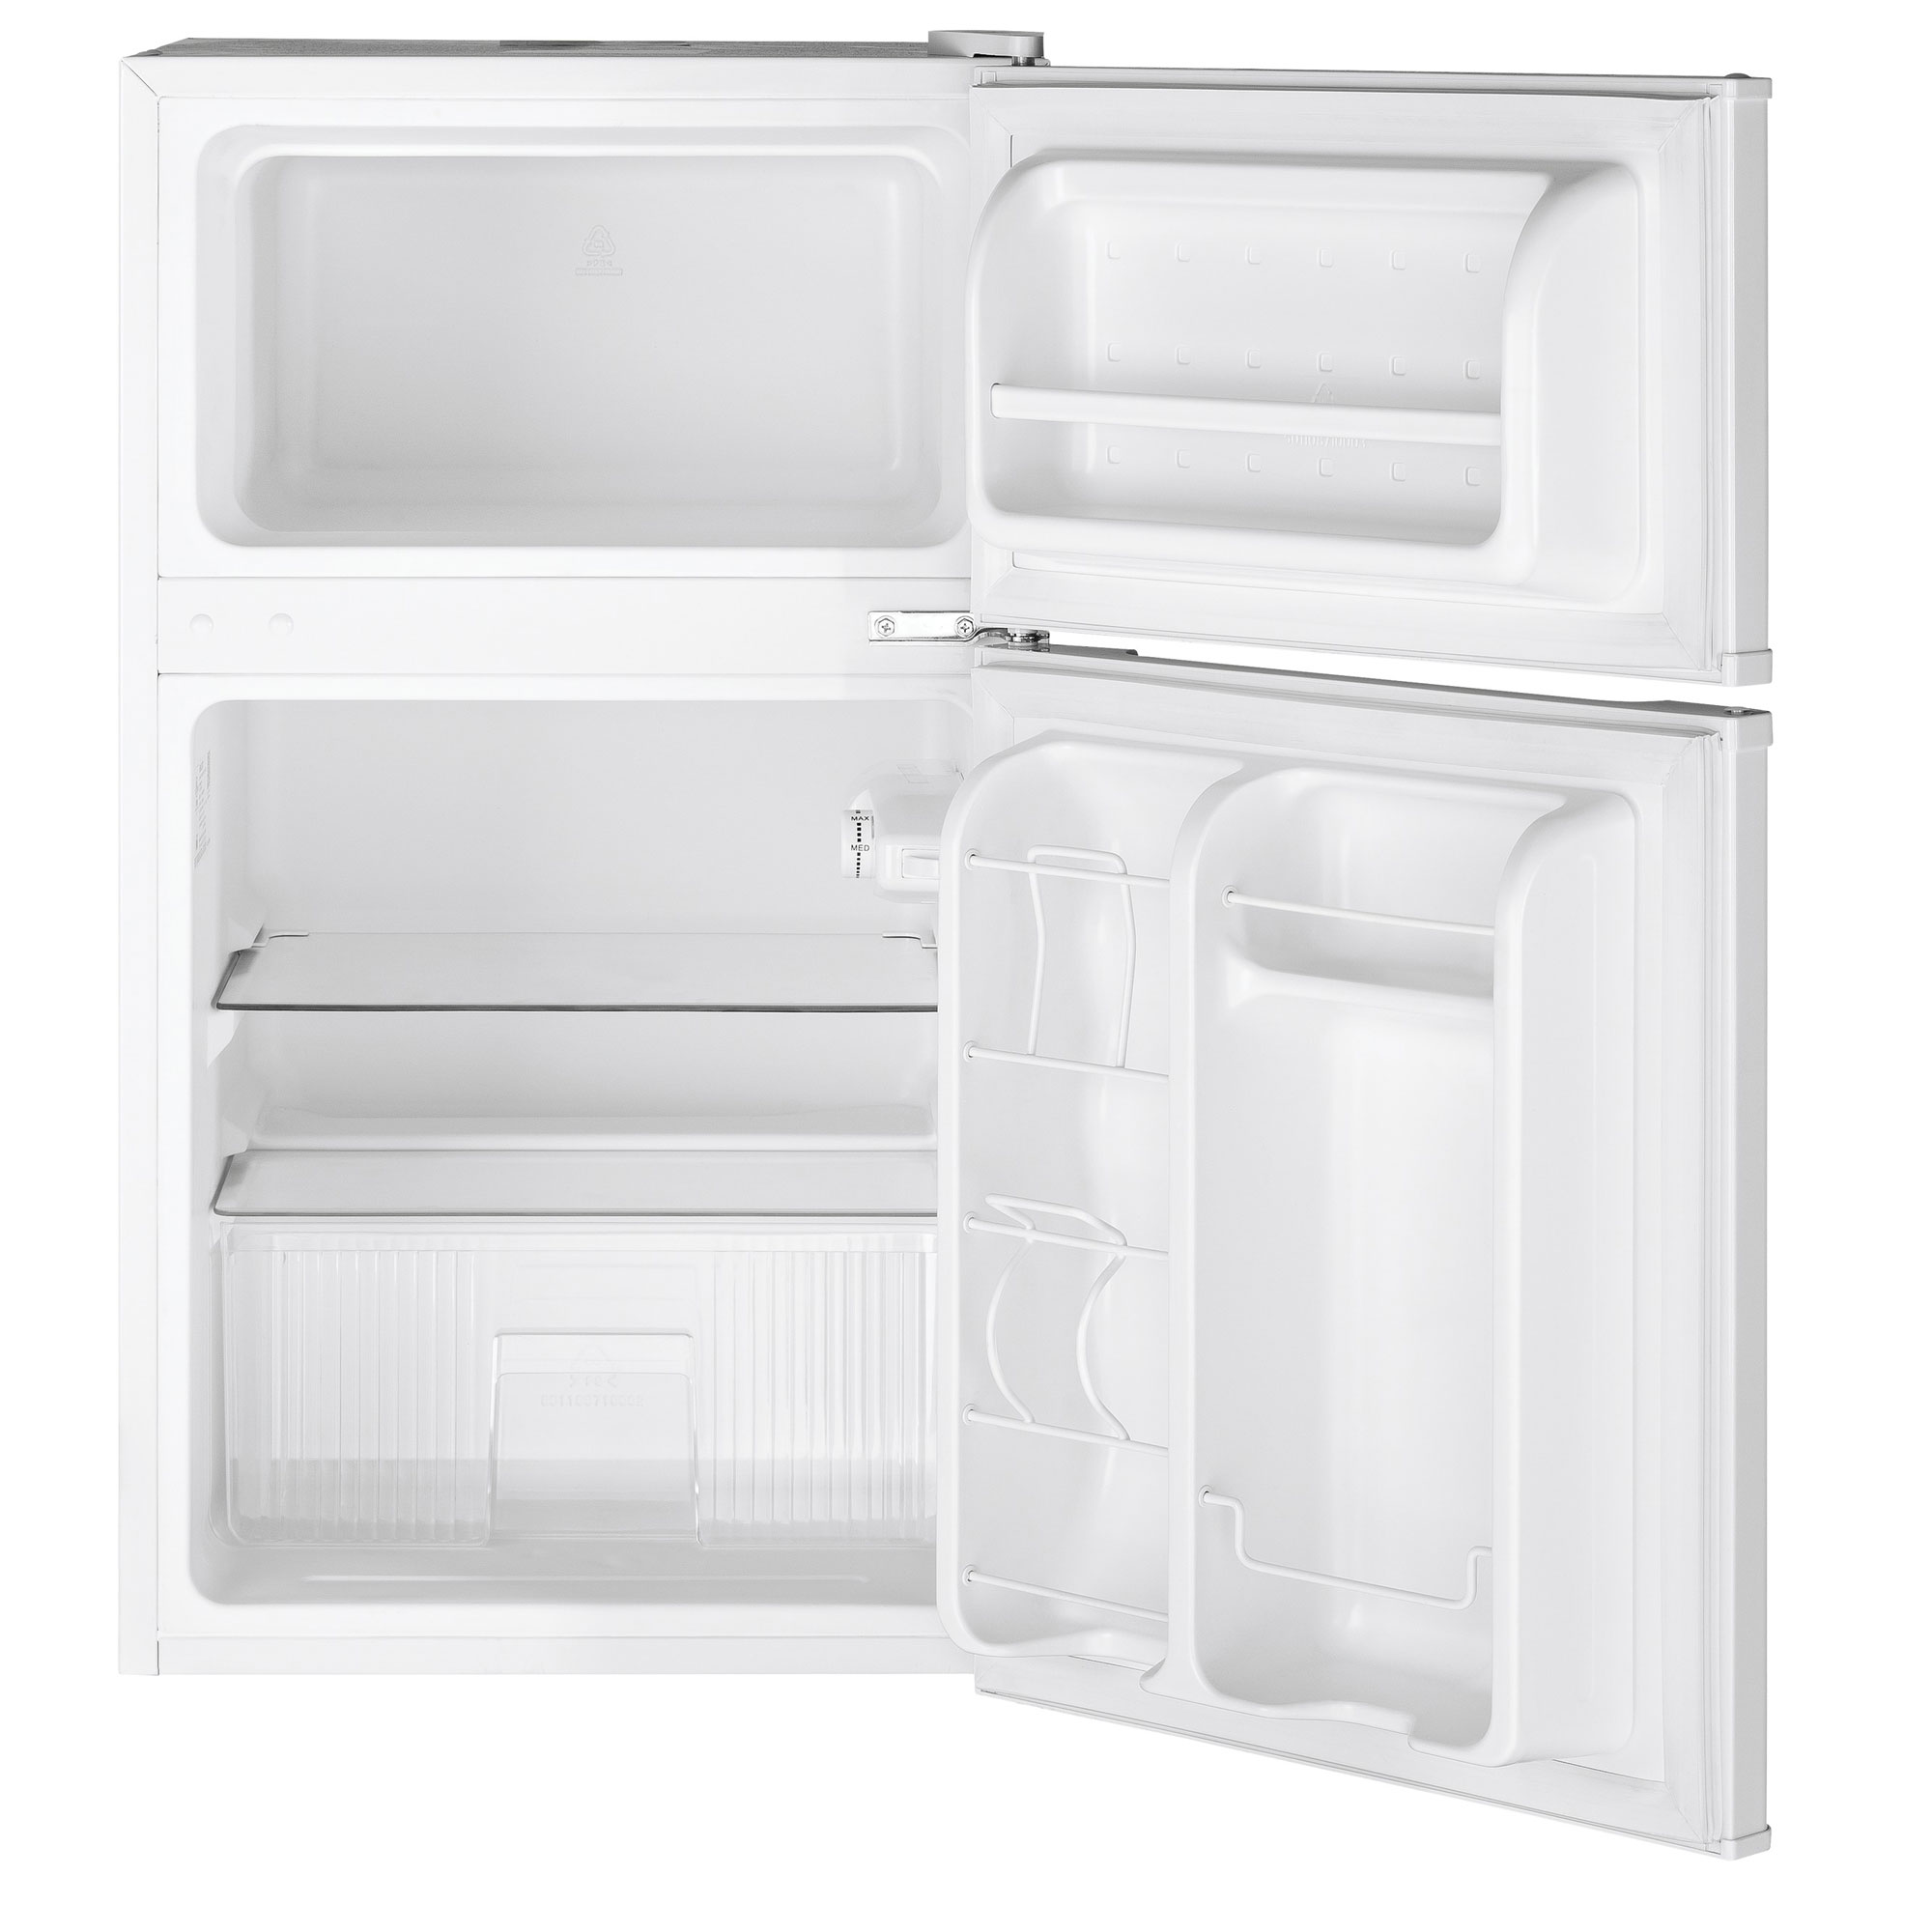 Ge Gde03gk 19" Wide 3.1 Cu. Ft. Energy Star Rated Freestanding Refrigerator - White - image 2 of 5